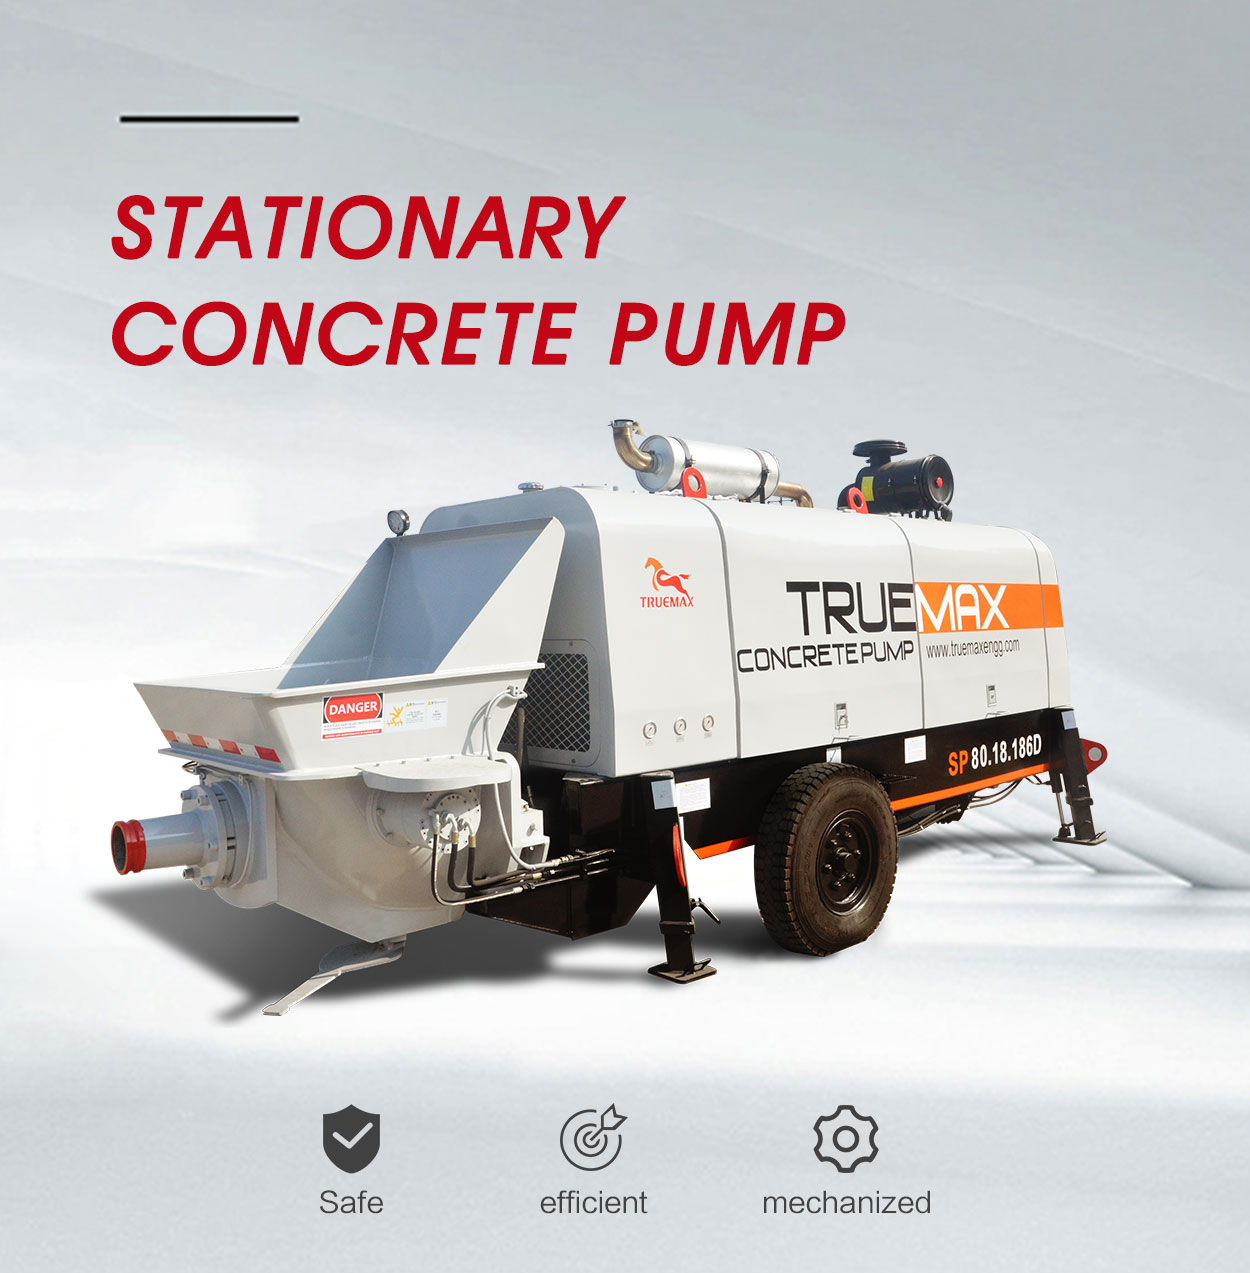 What are the types of concrete pumps?